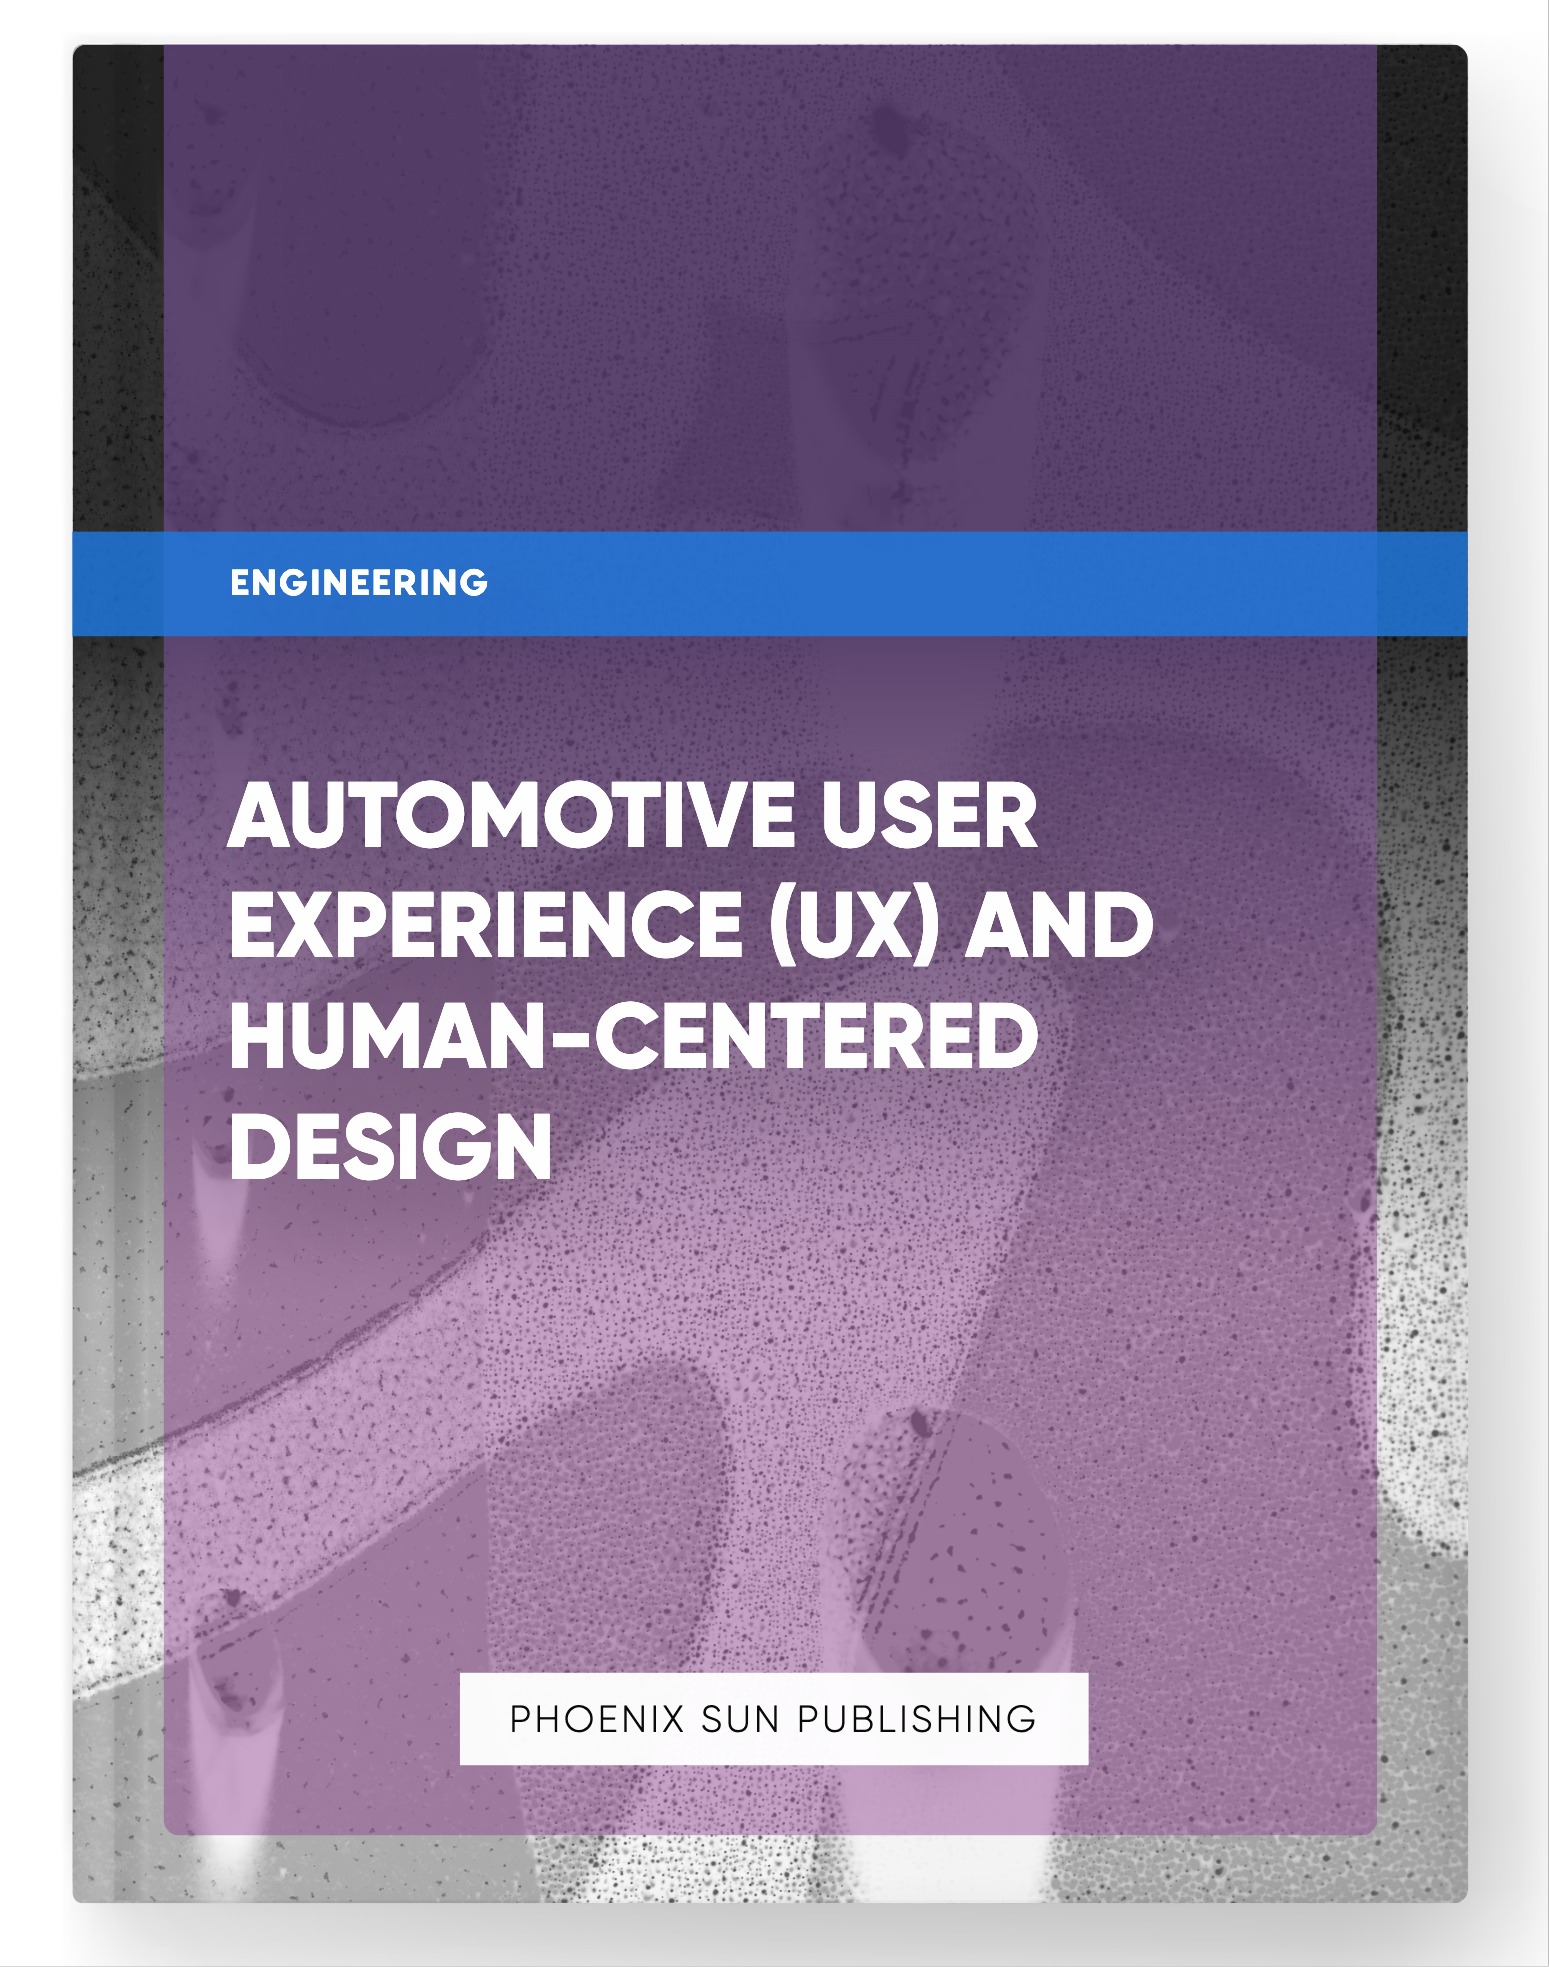 Automotive User Experience (UX) and Human-Centered Design